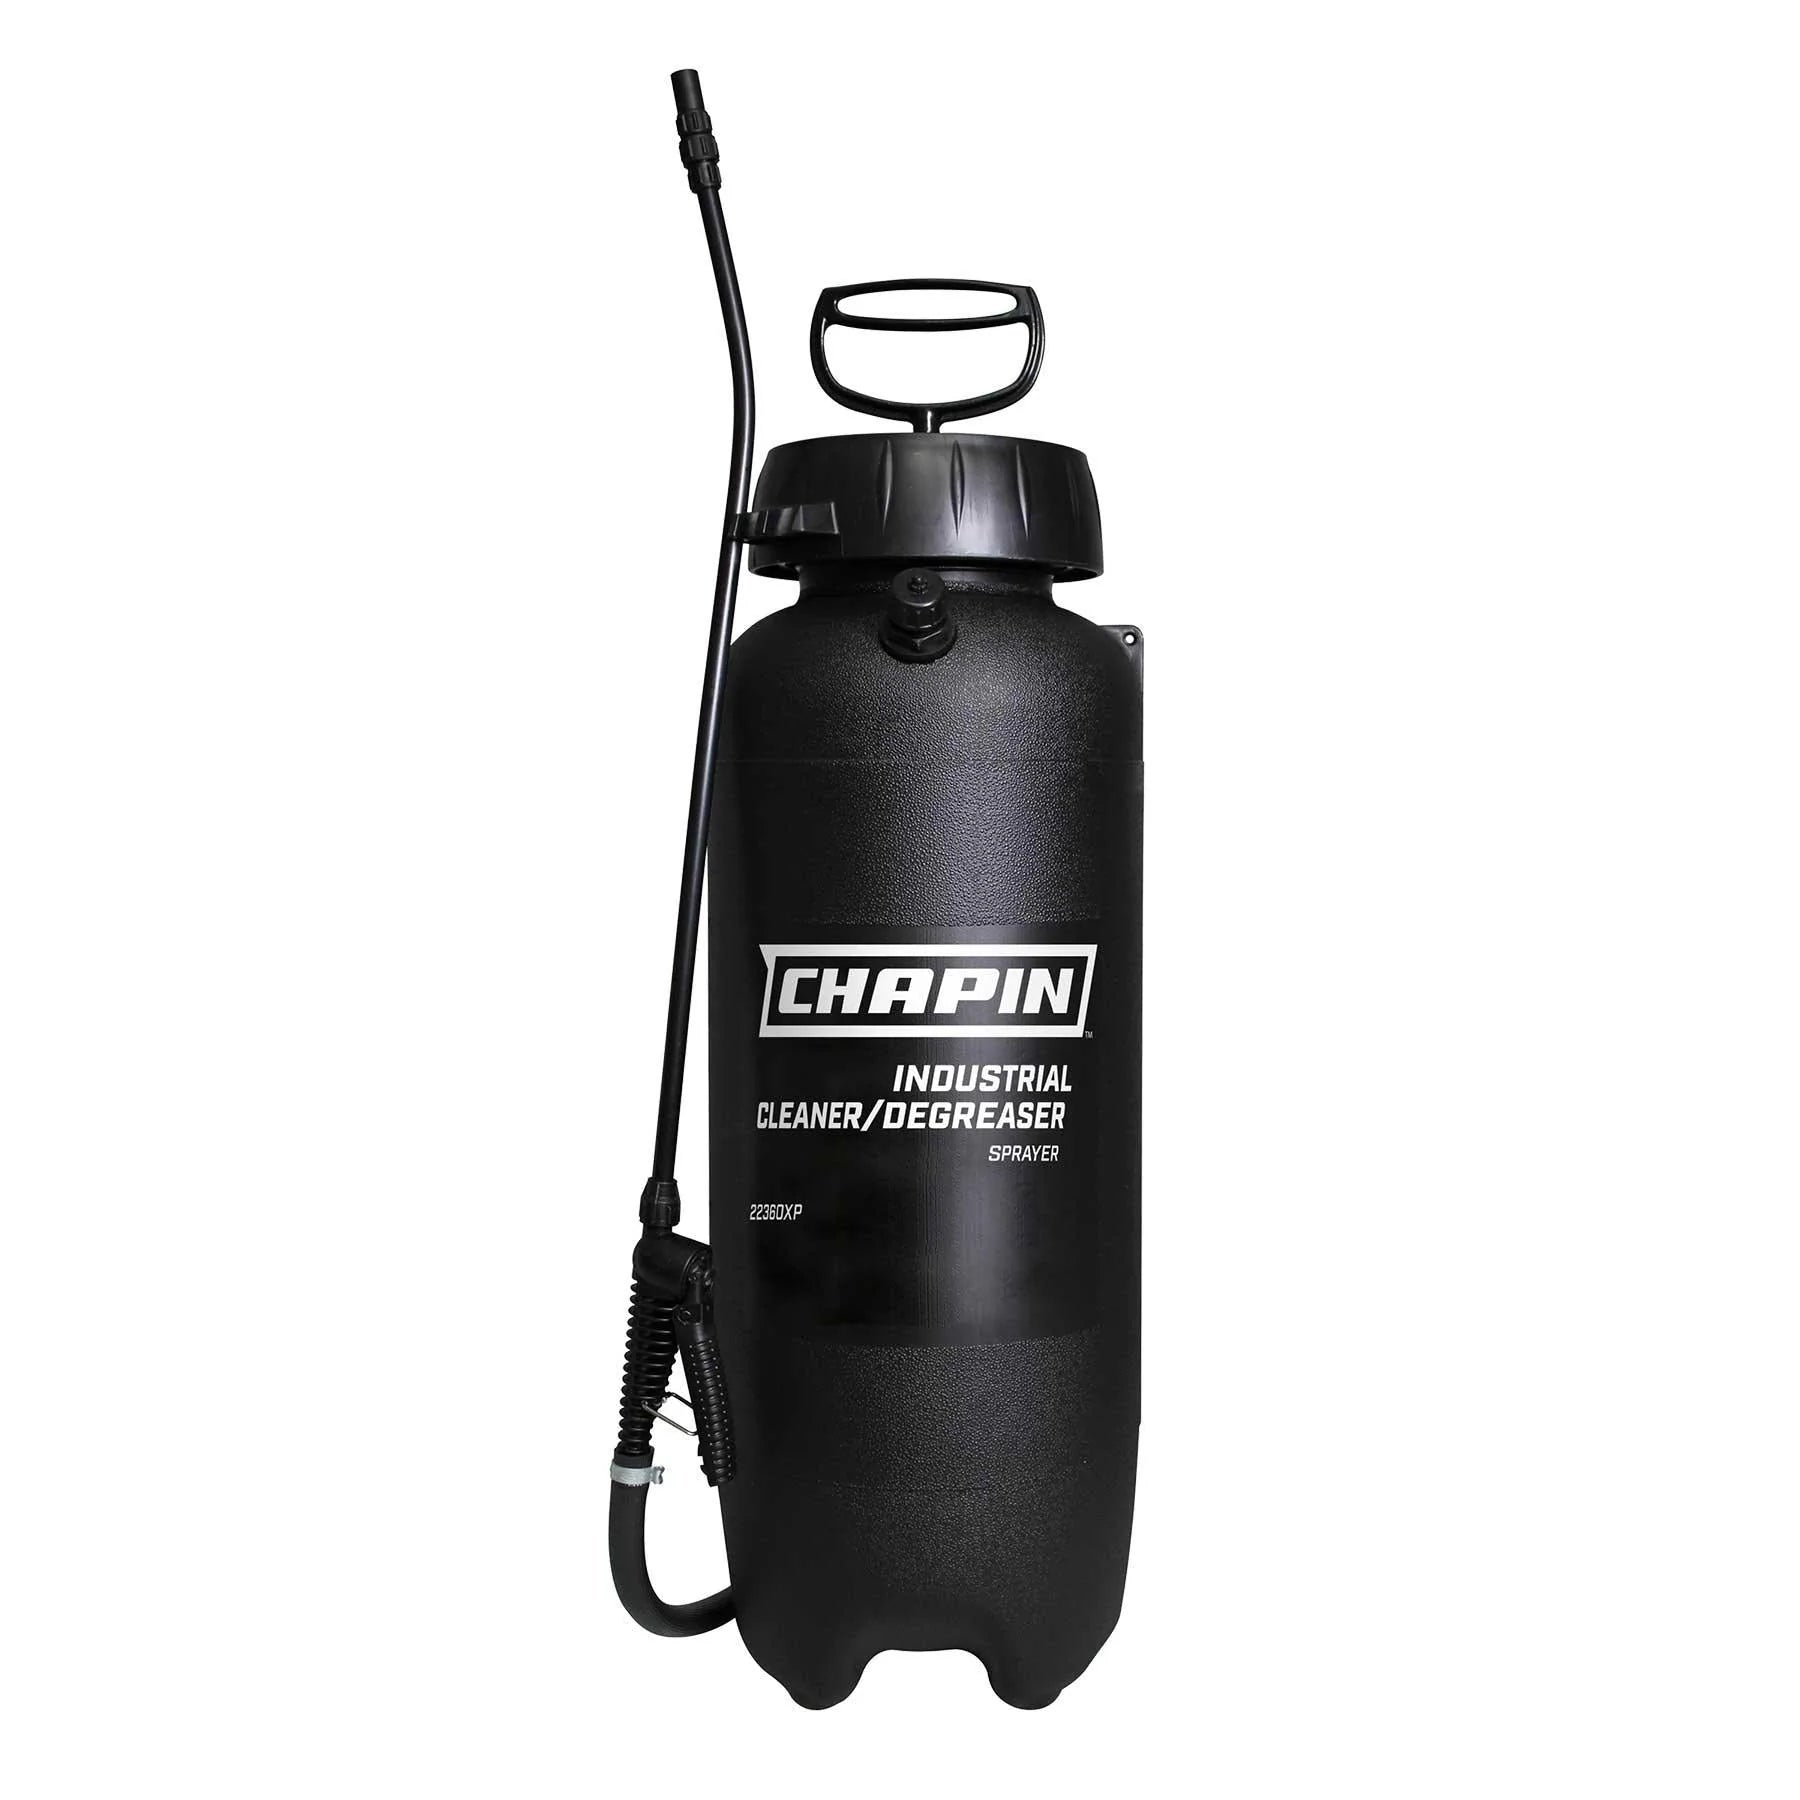 Chapin 10509 Upside-down Trigger Sprayer for Disinfection